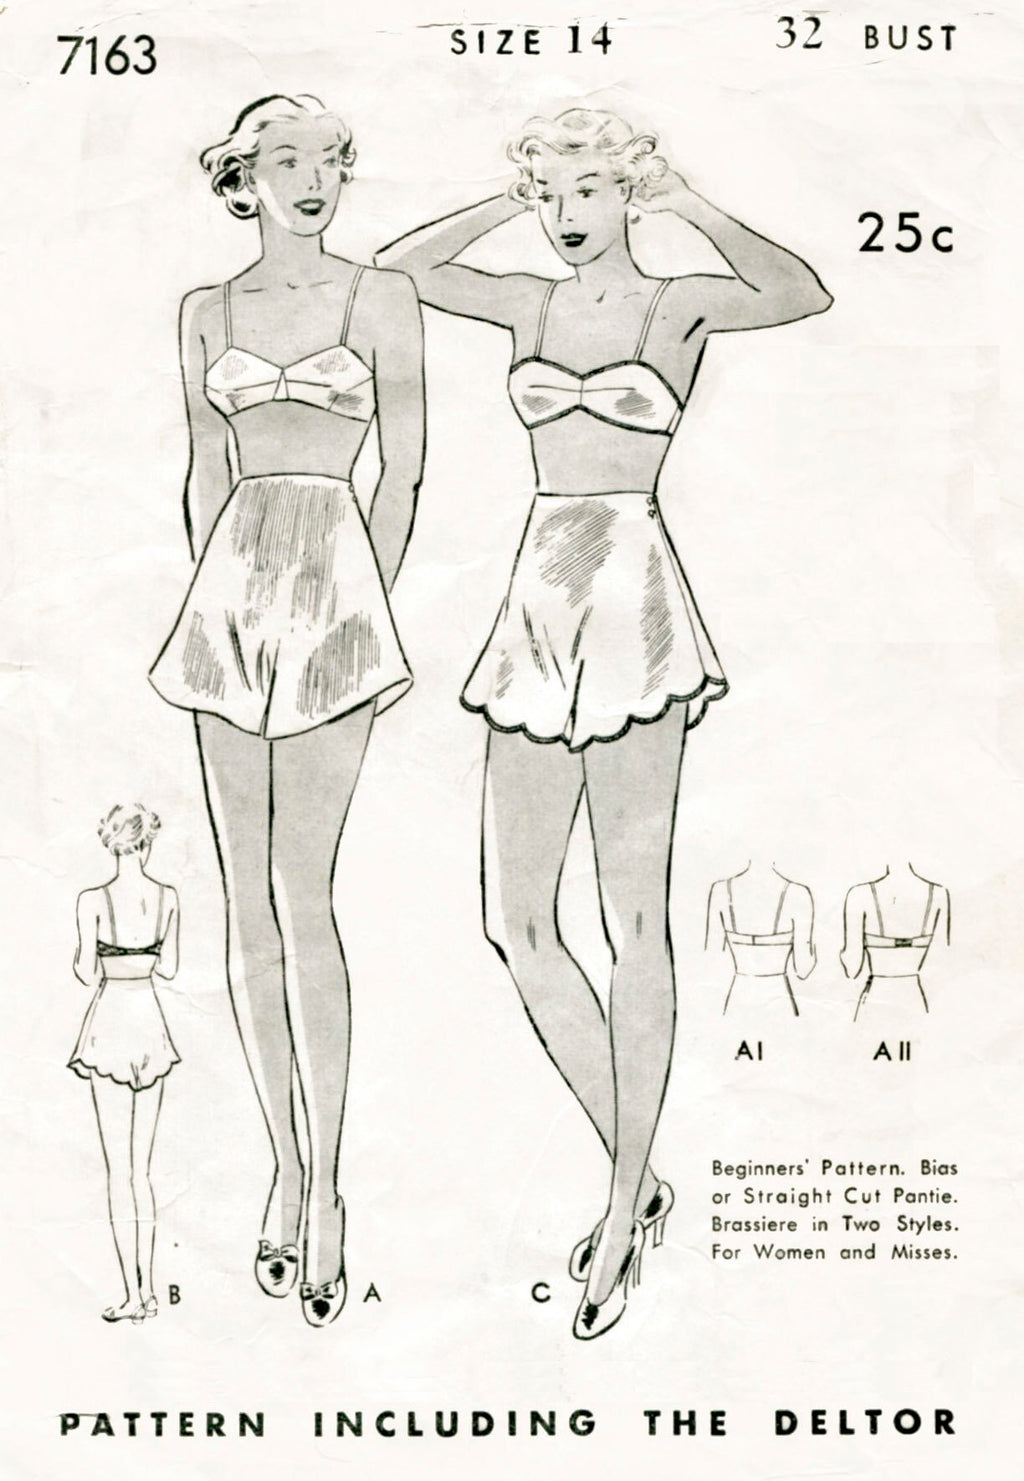 Butterick 7163 1930s vintage lingerie sewing pattern bra and tap shorts 1930 30s